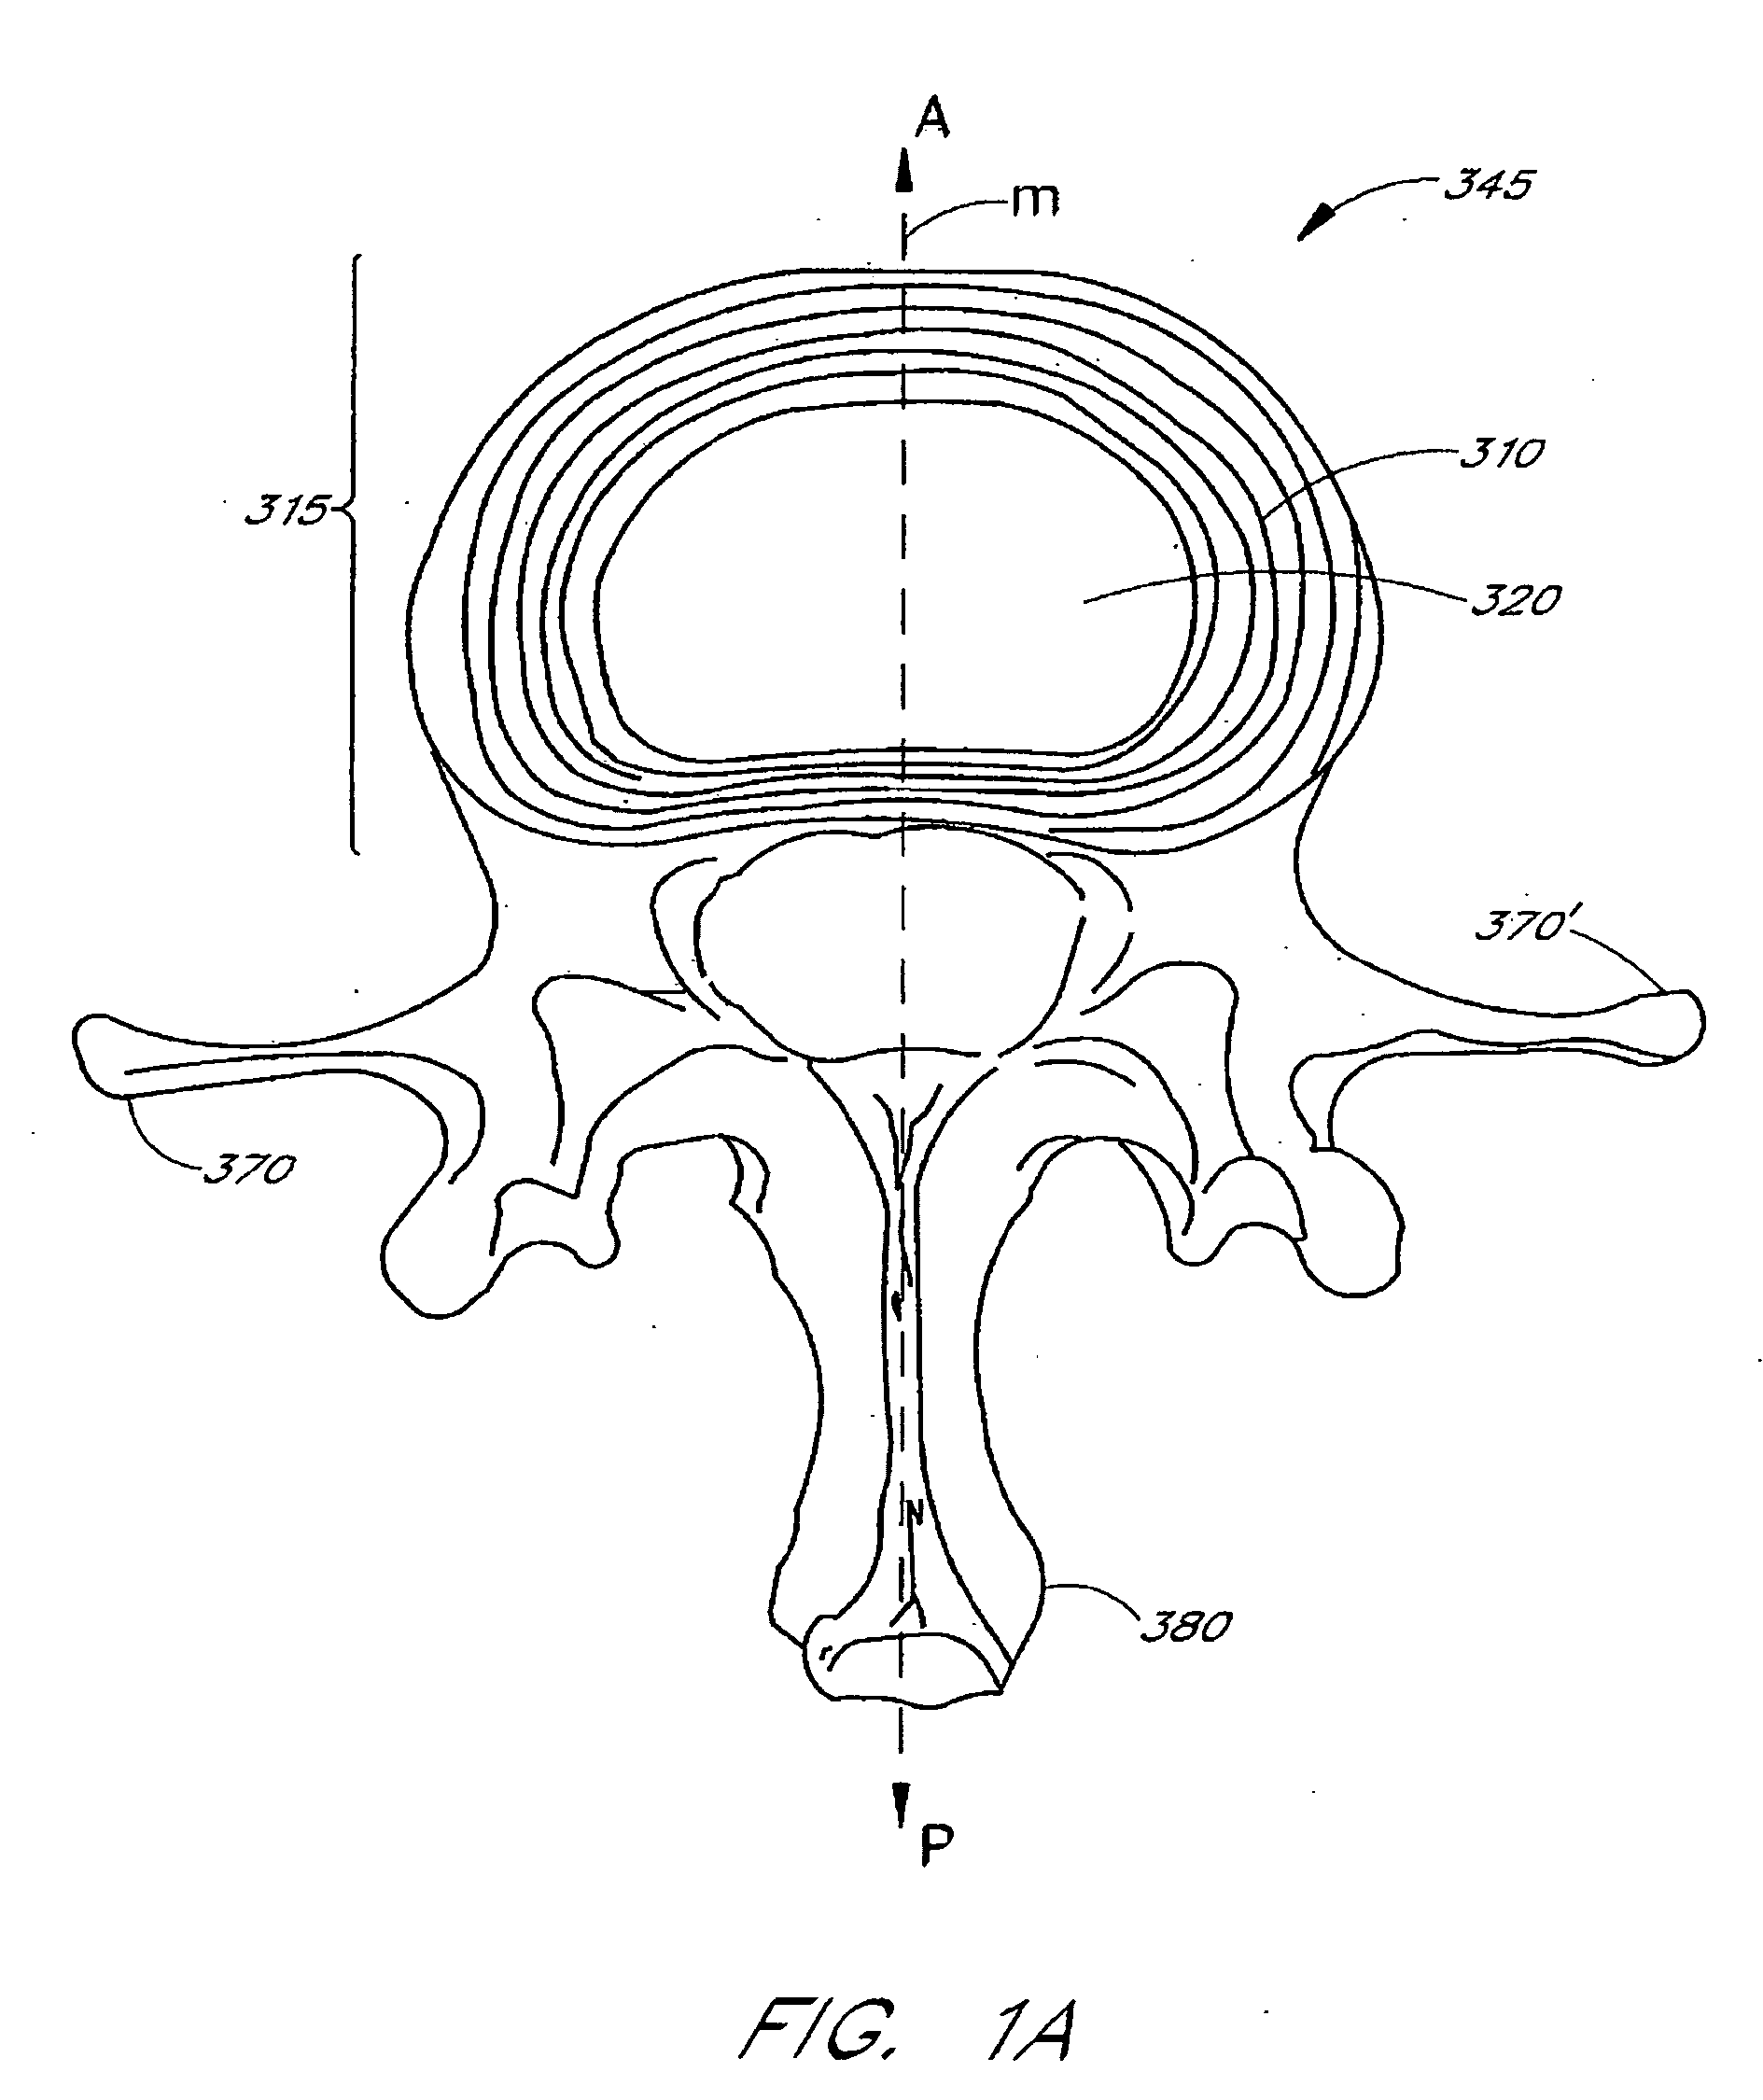 Method of performing a procedure within a disc